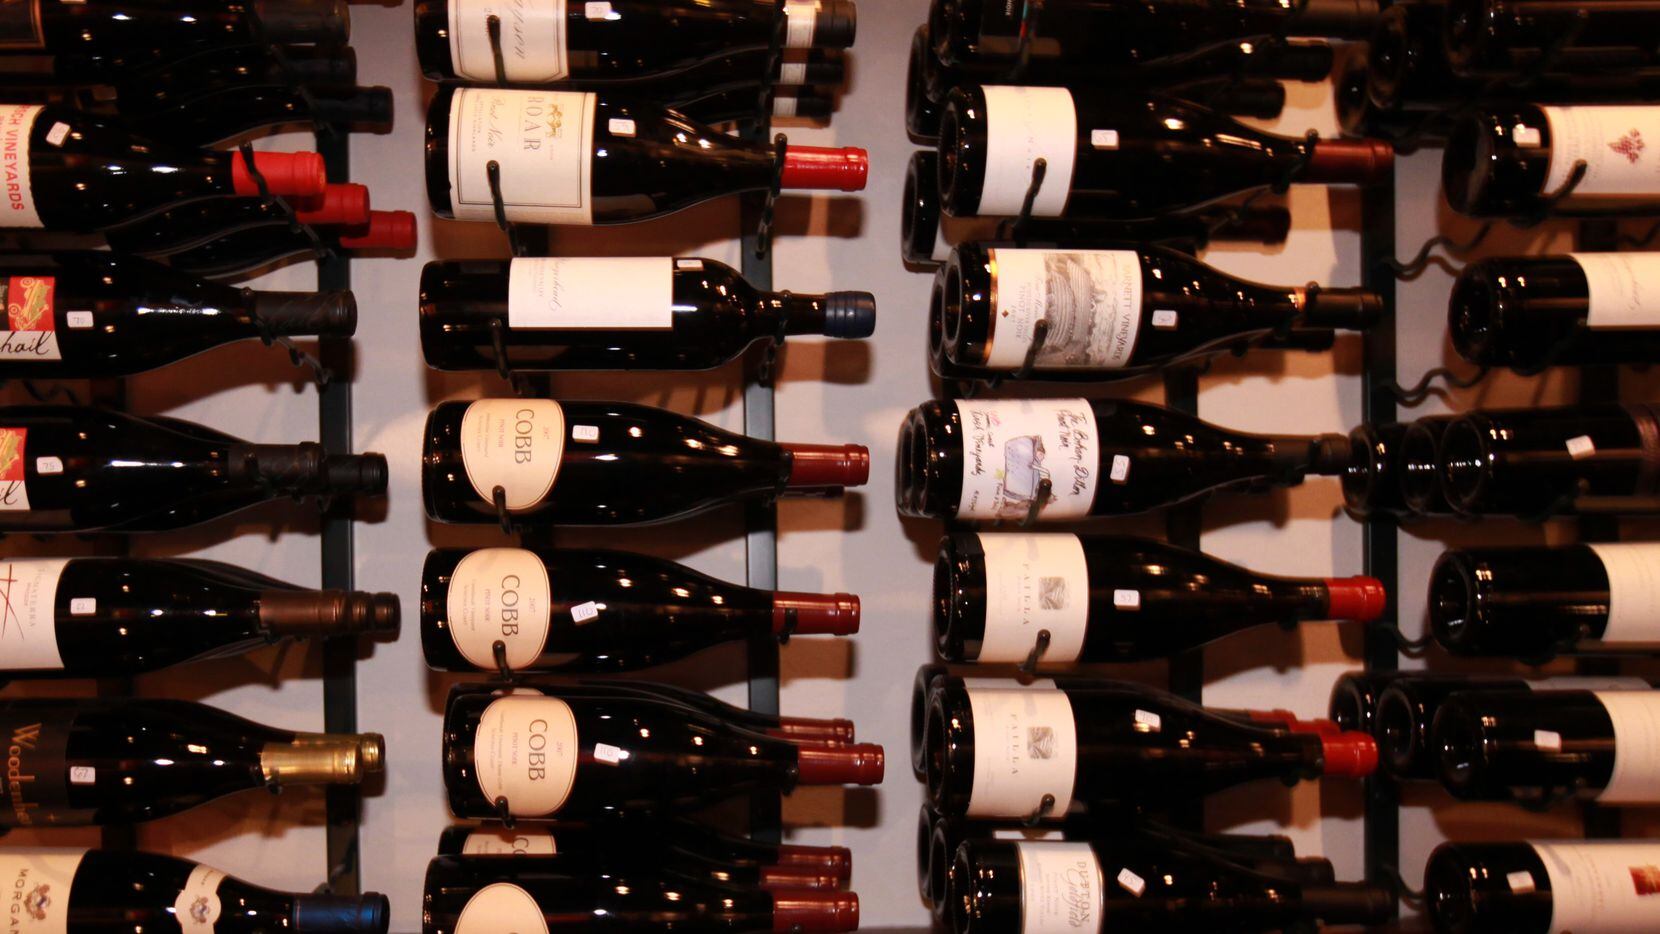 No need to cry in your wine: Veritas Wine Room in Dallas will remain open, the owners say.